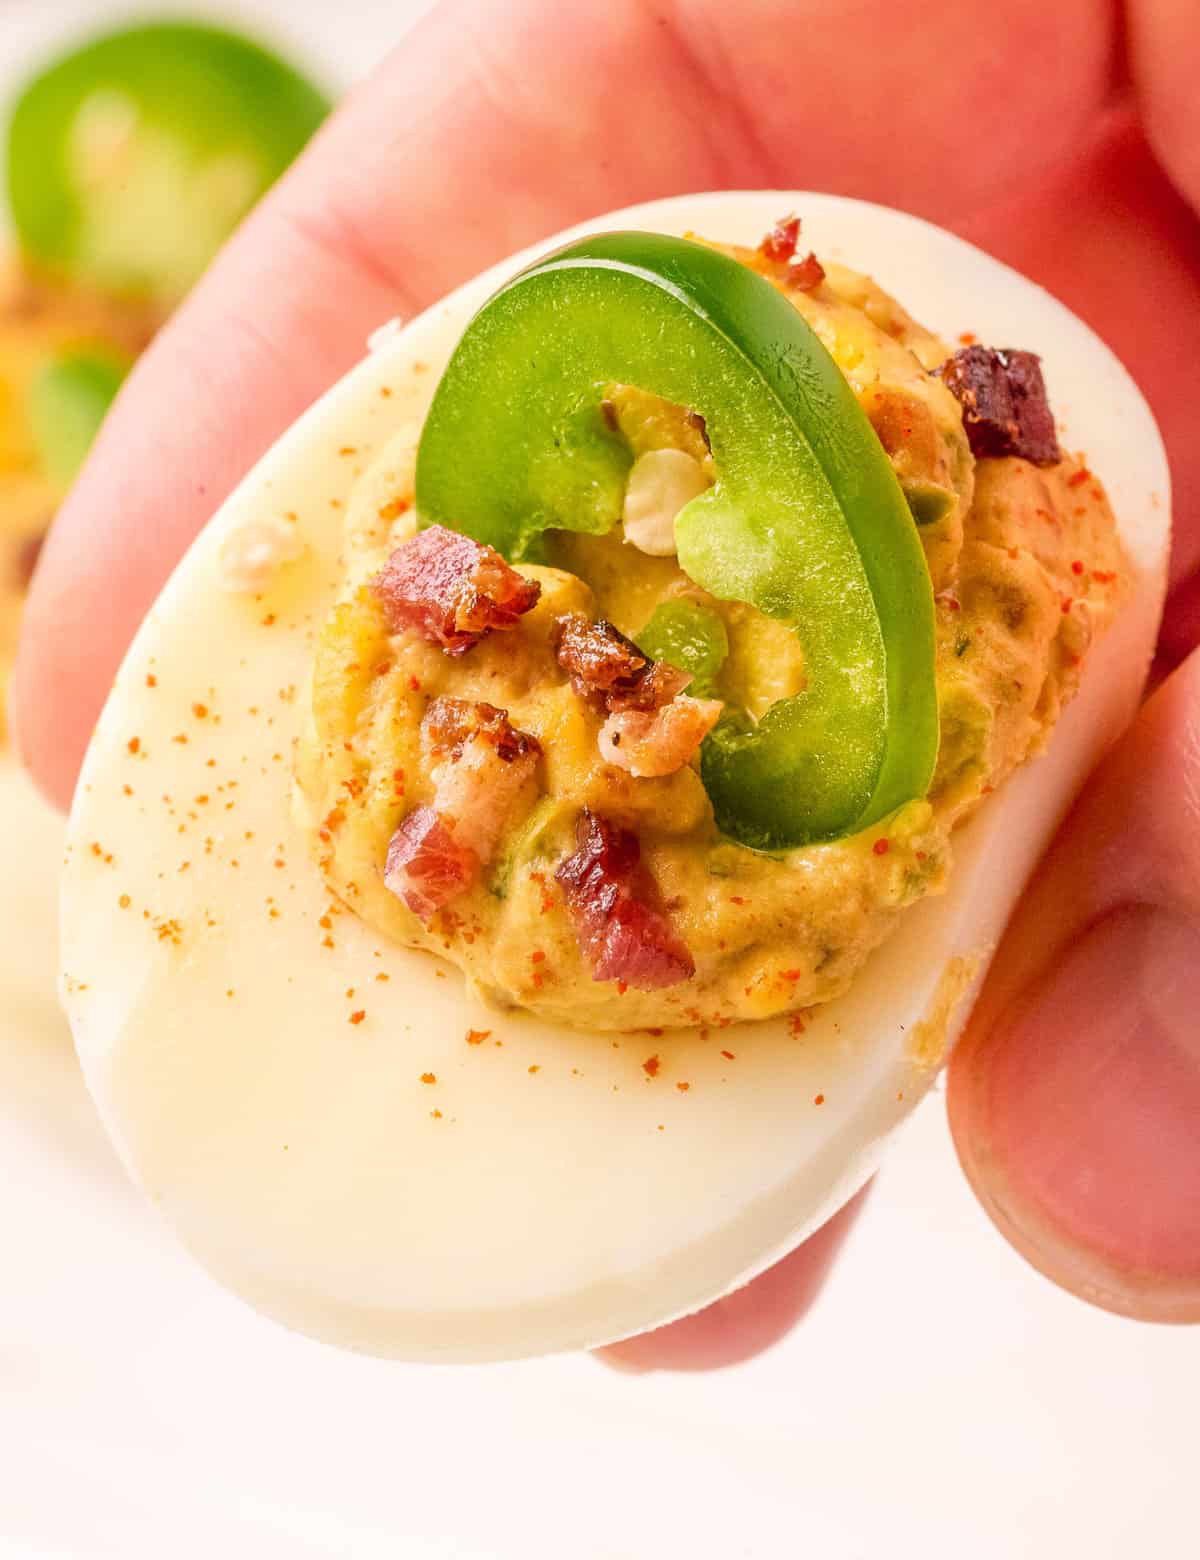 https://www.thechunkychef.com/wp-content/uploads/2023/02/Jalapen%CC%83o-Bacon-Deviled-Eggs-feat.jpg